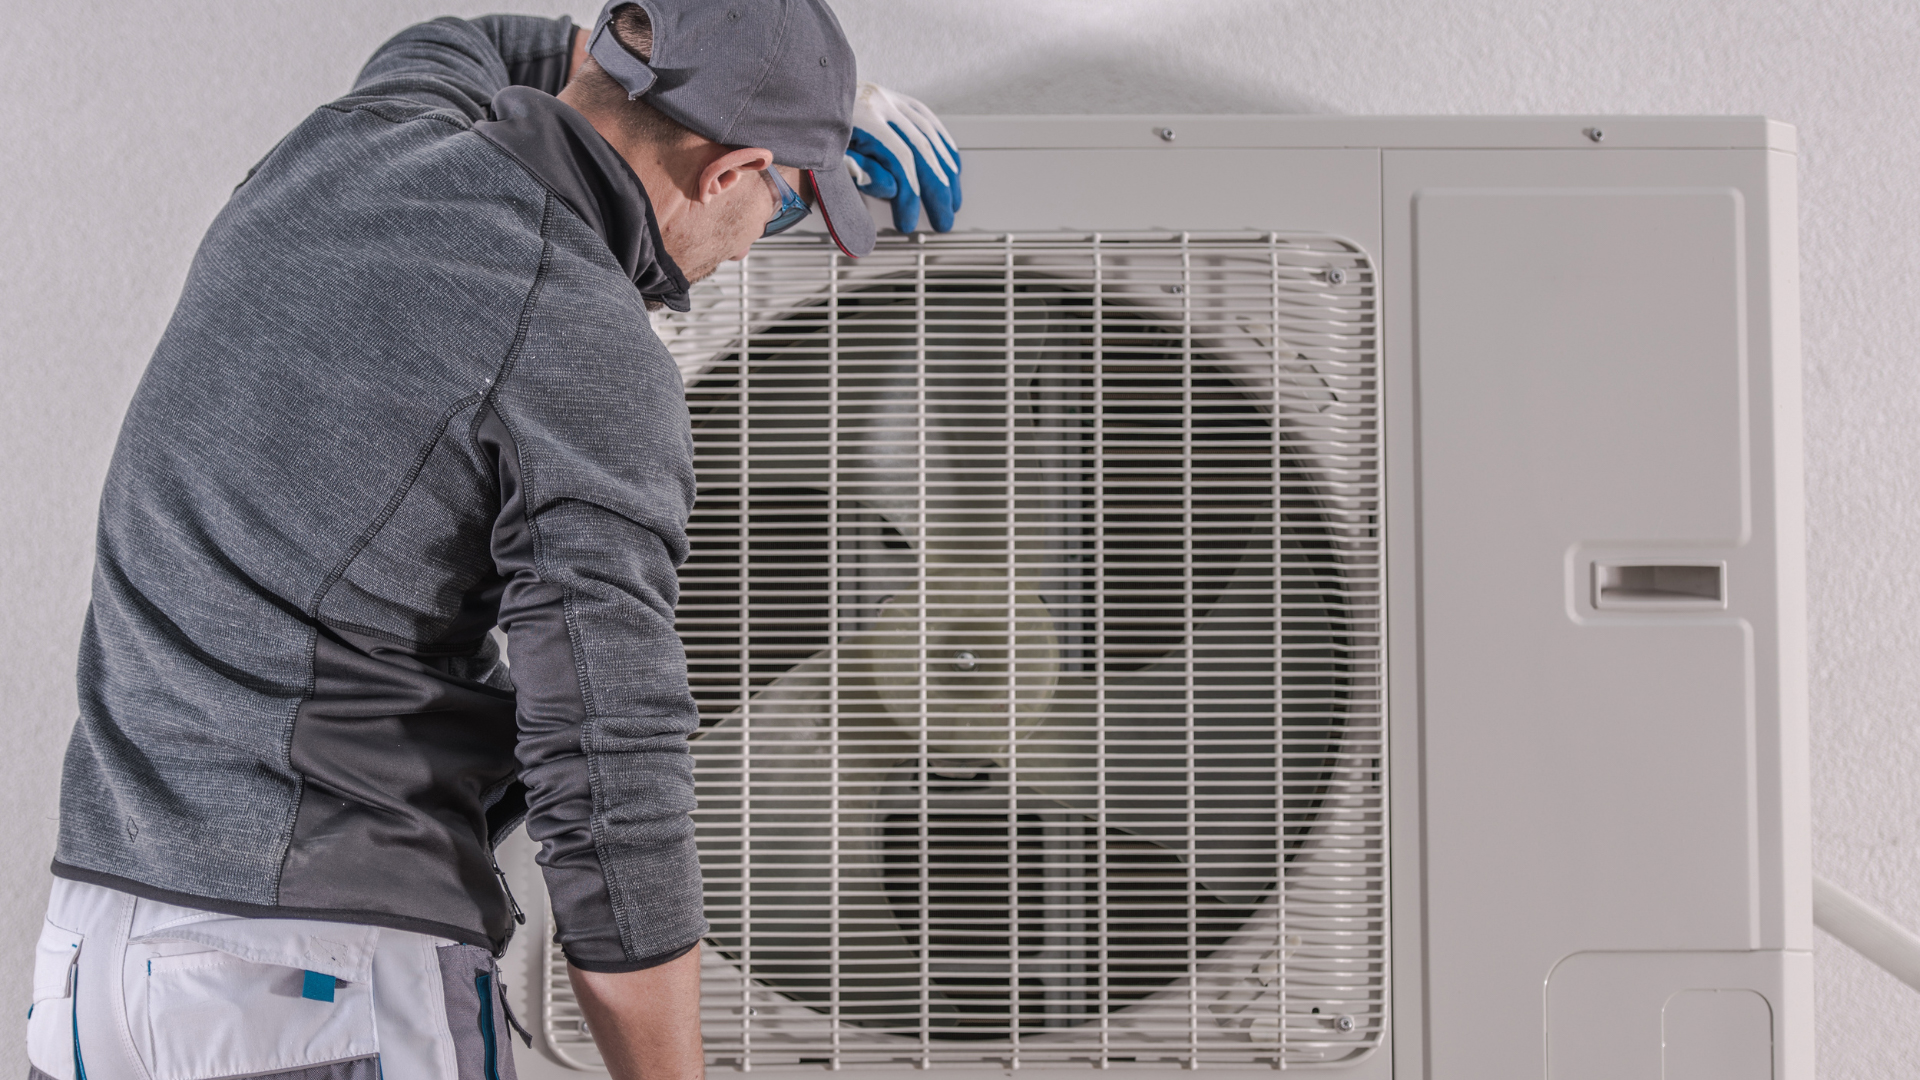 Heat Pump Installation in Charleston, SC from Fix-it 24/7 Air Conditioning, Plumbing & Heating